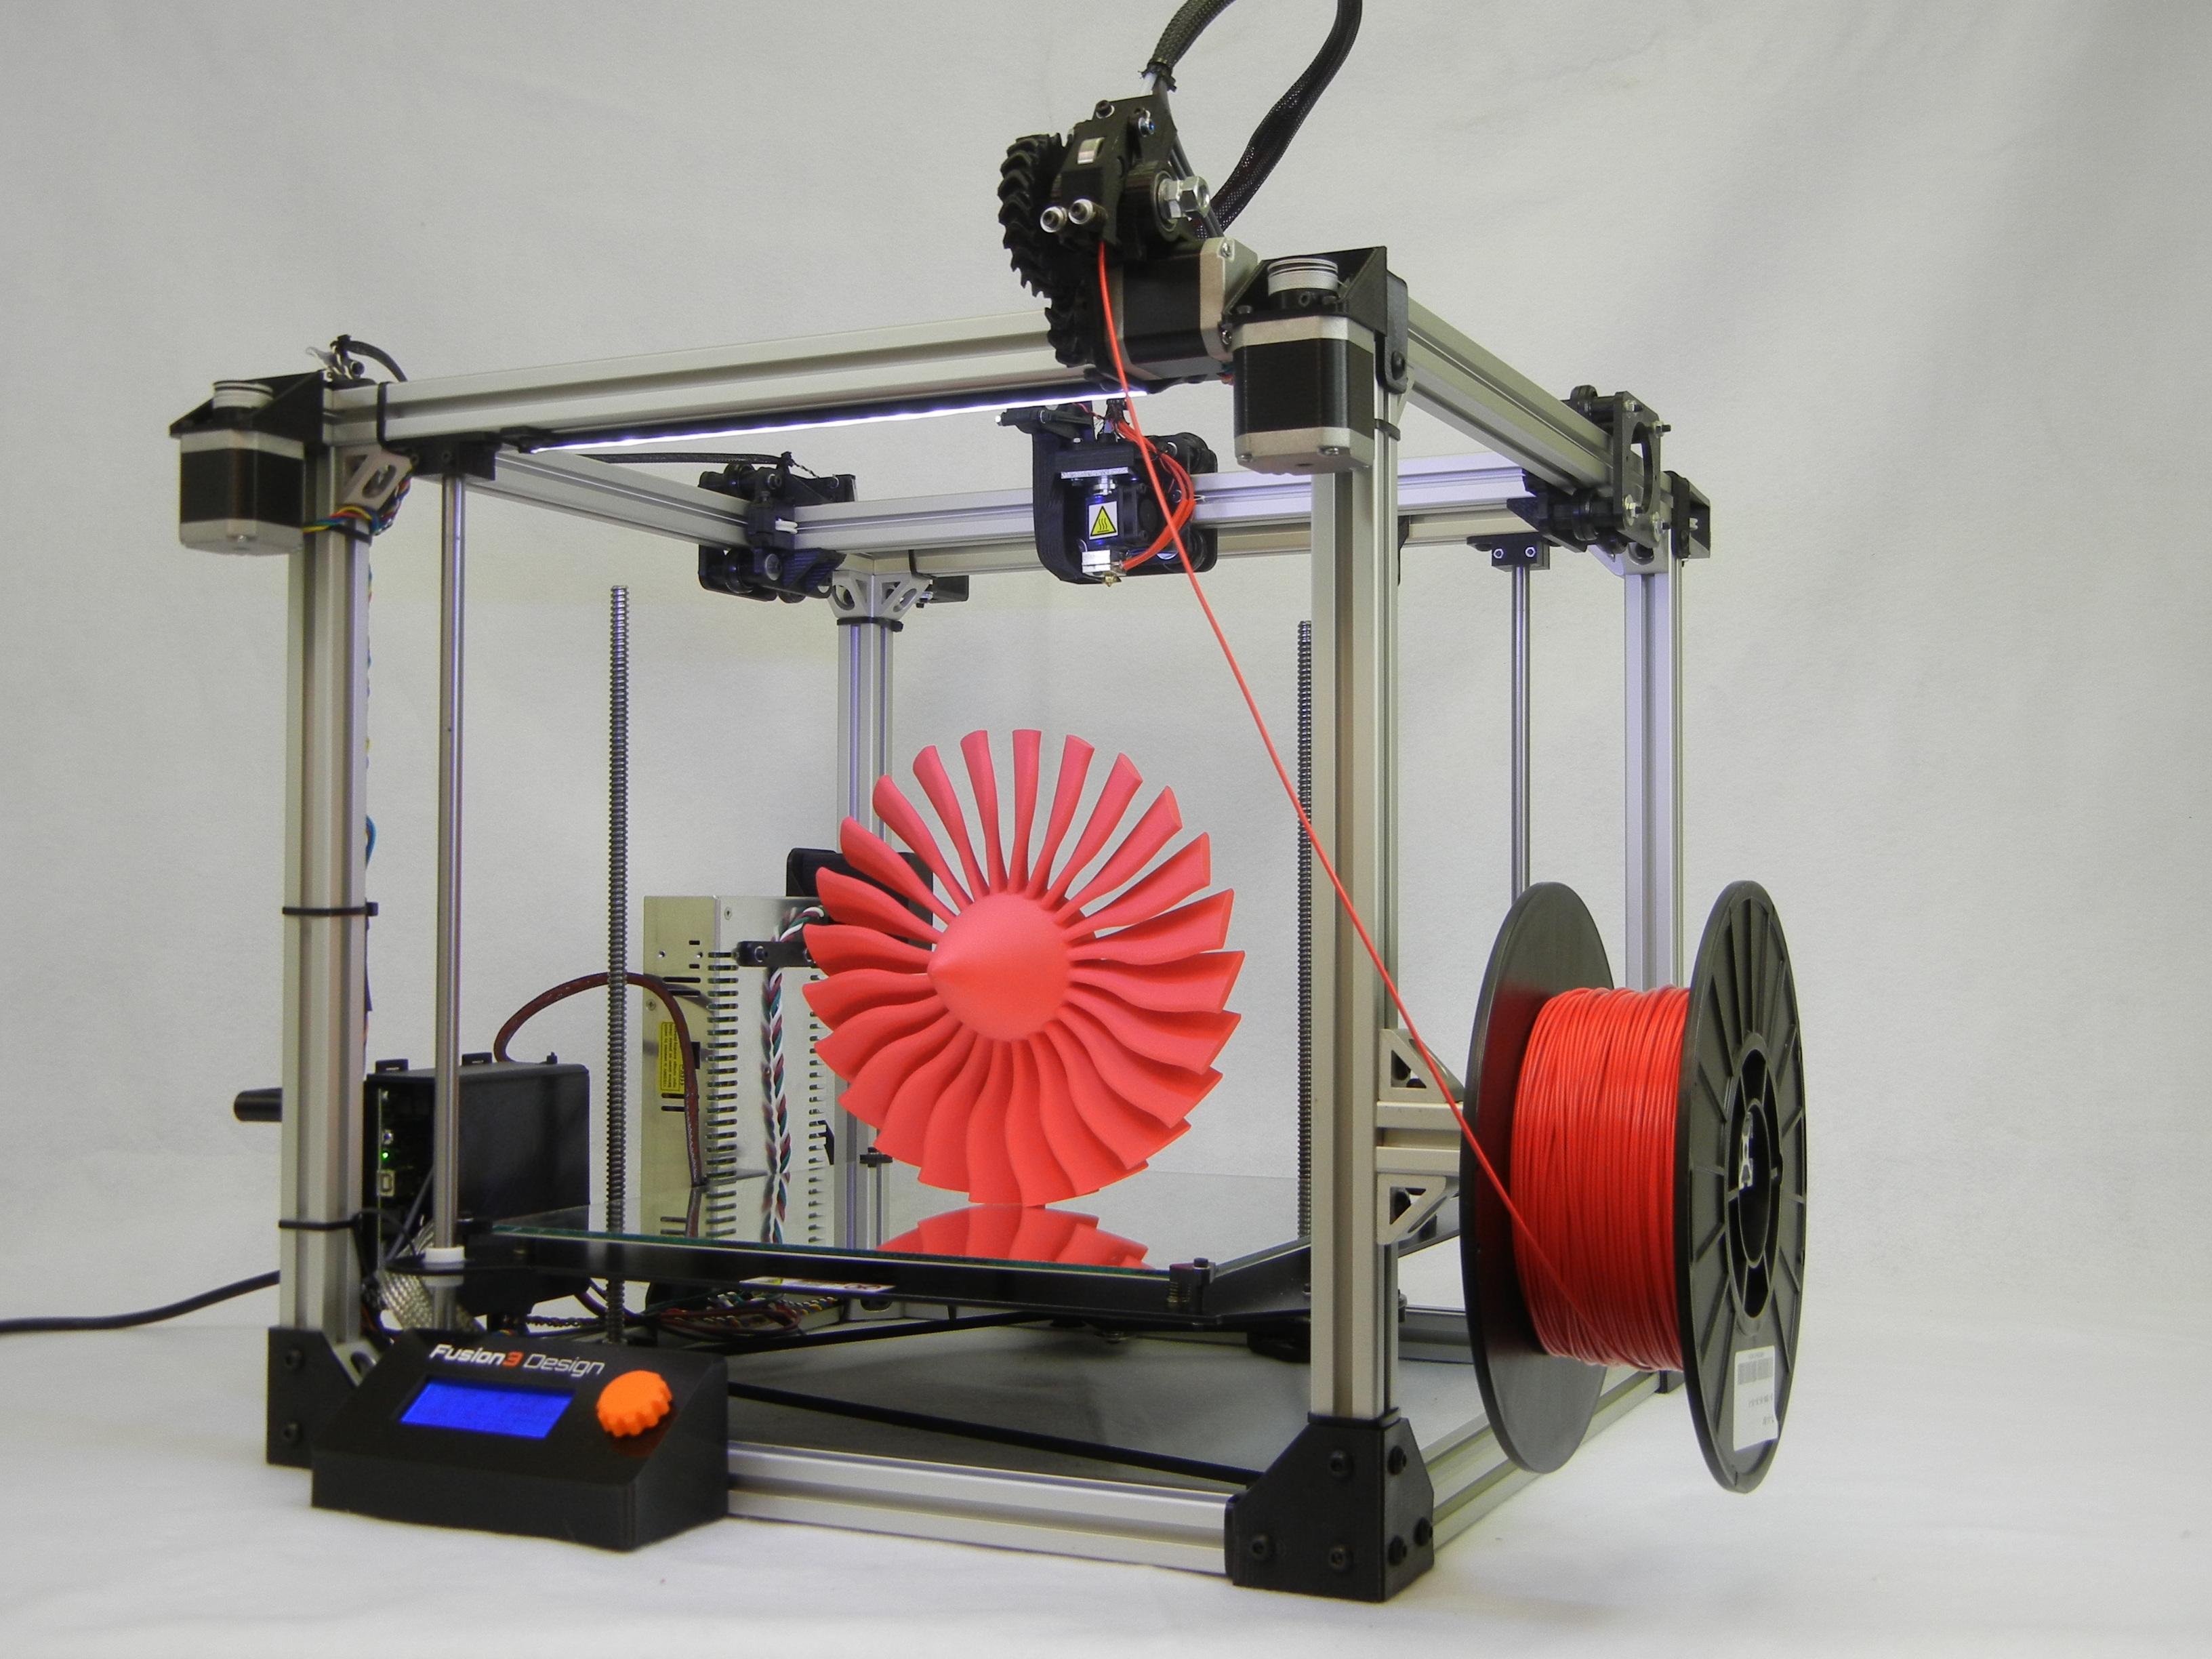 Fusion3 to Offer Discounts on 3D Printers to MakerSpace